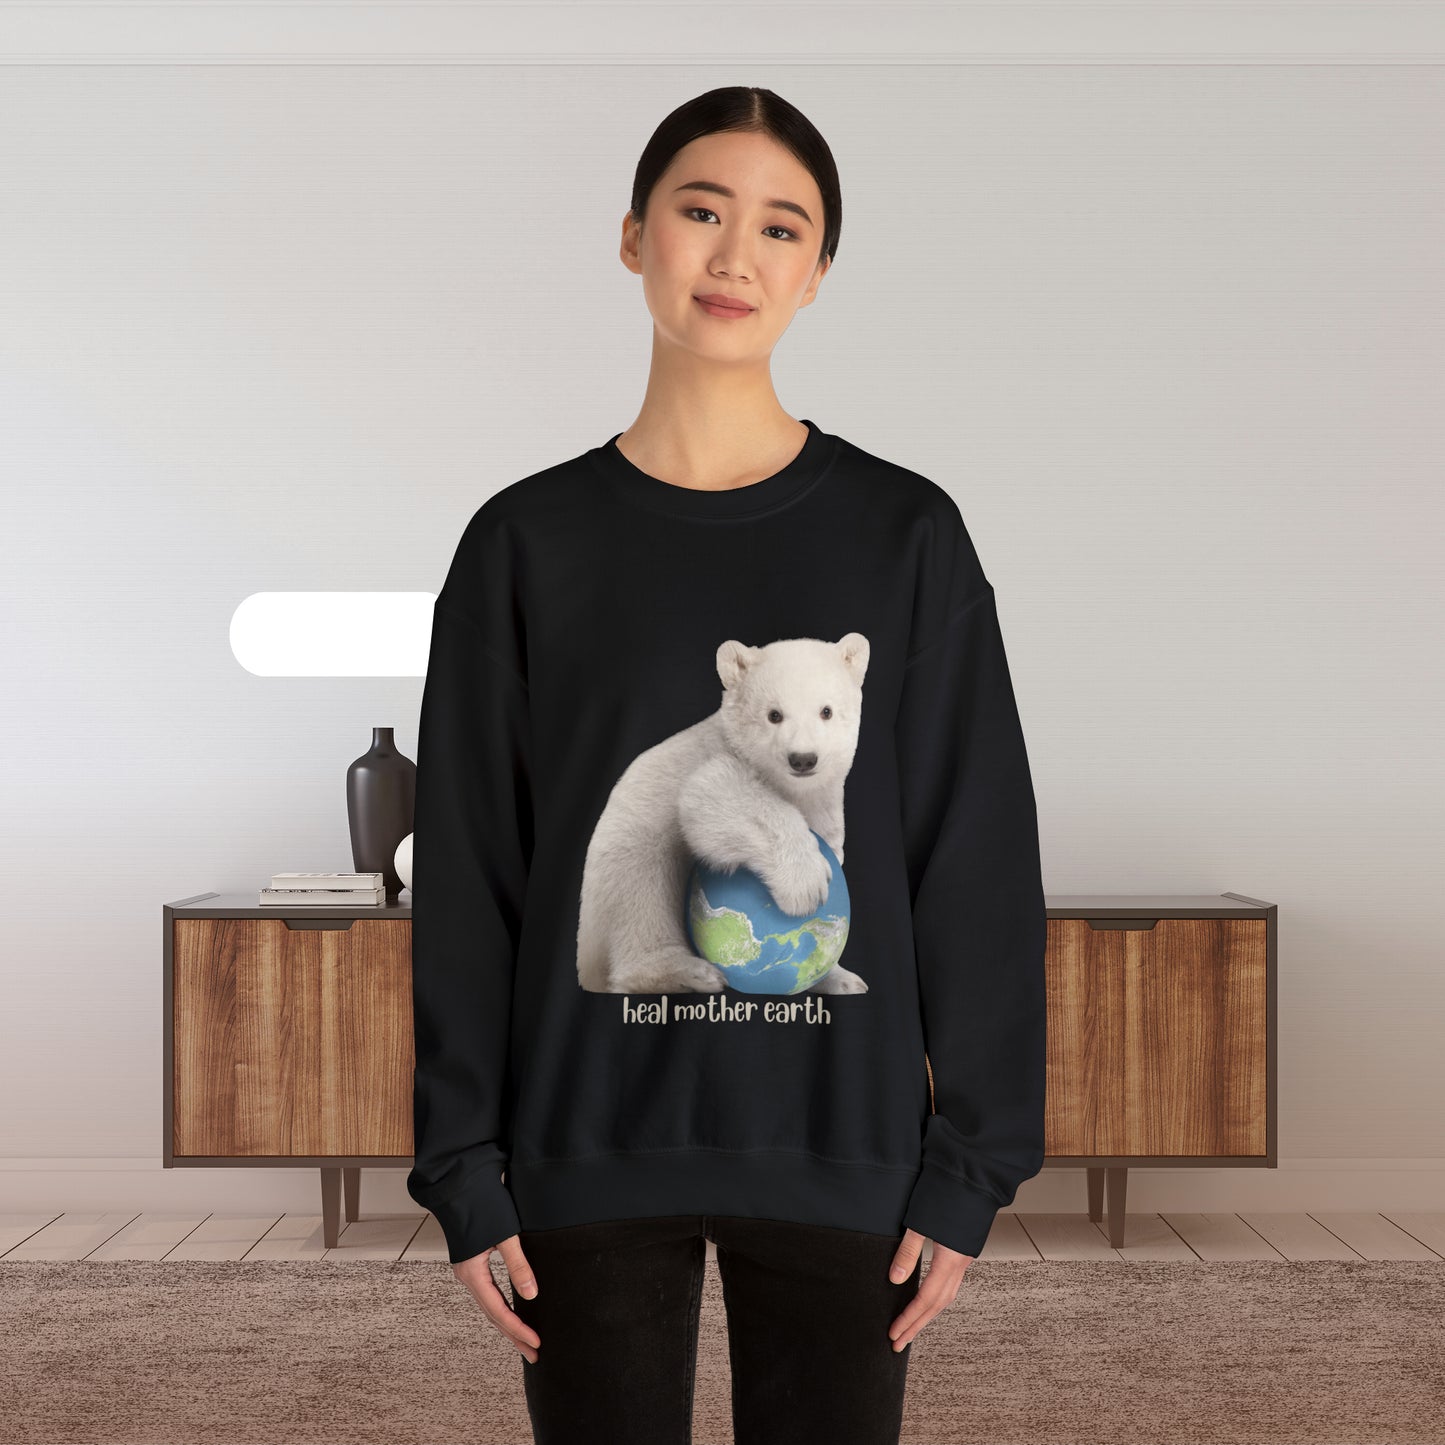 Adorable polar bear cub hugging Mother Earth and asks us to “Heal Mother Earth. ! We can do it together! Give the gift of this Unisex Heavy Blend™ Crewneck Sweatshirt or get one for yourself.